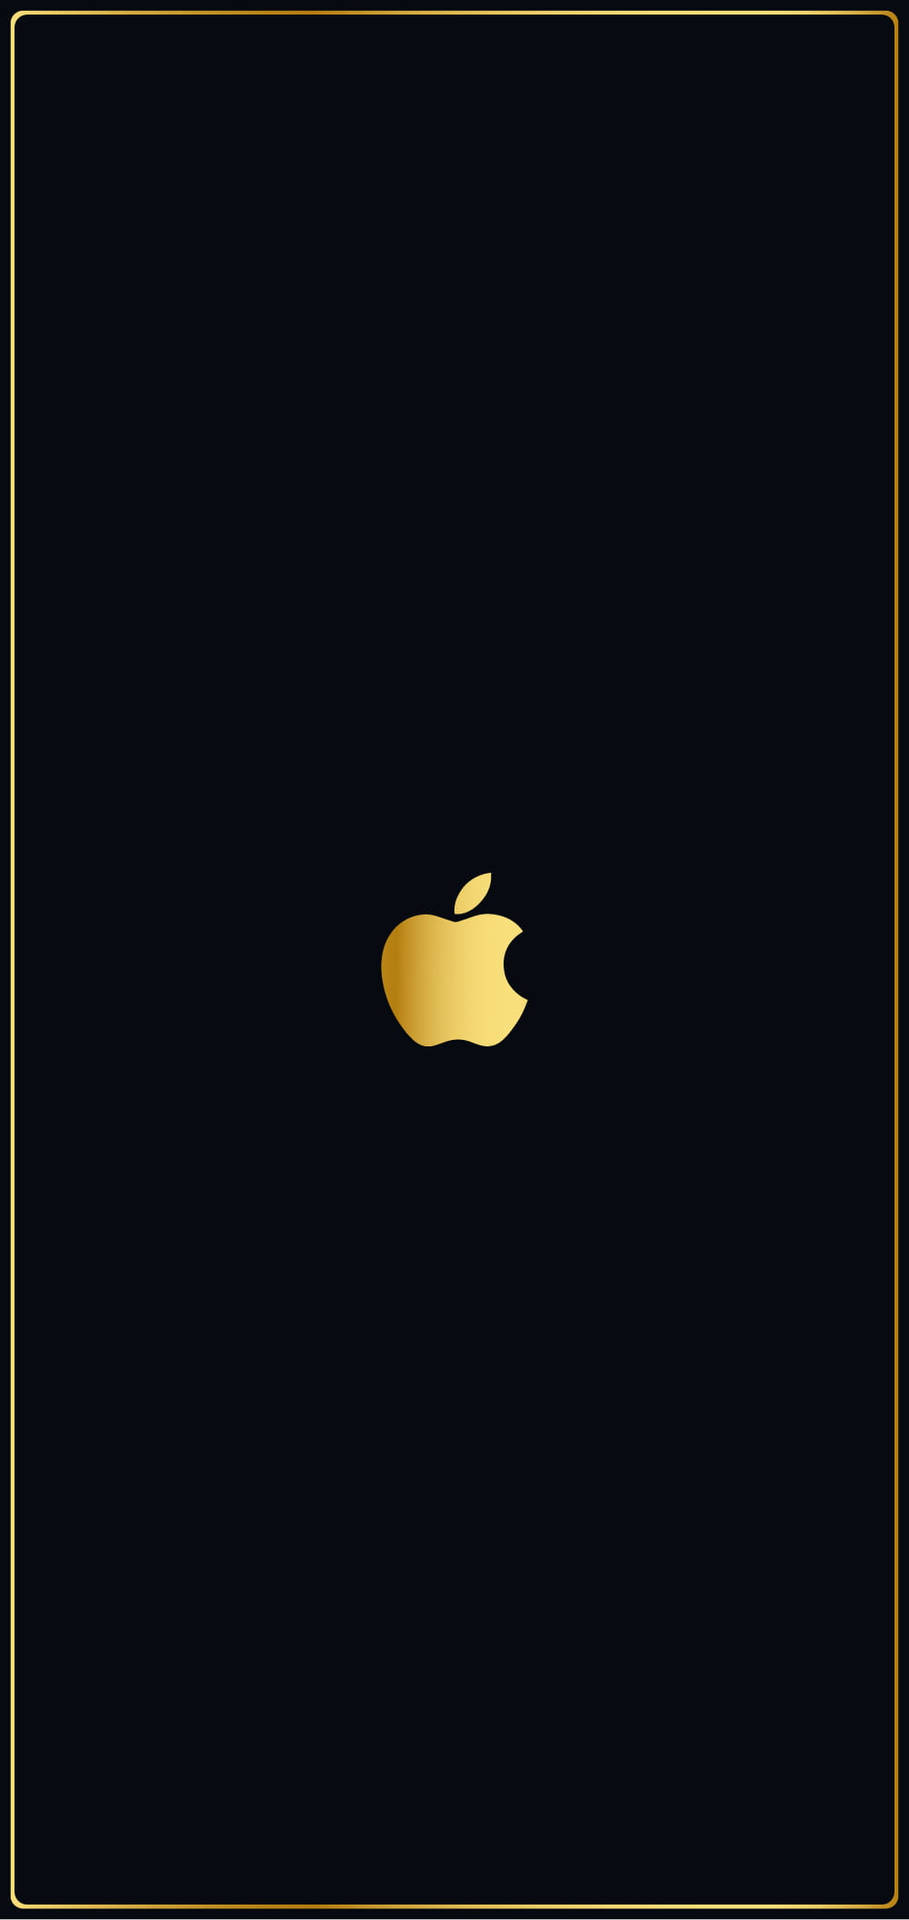 Full Hd Golden Apple Picture